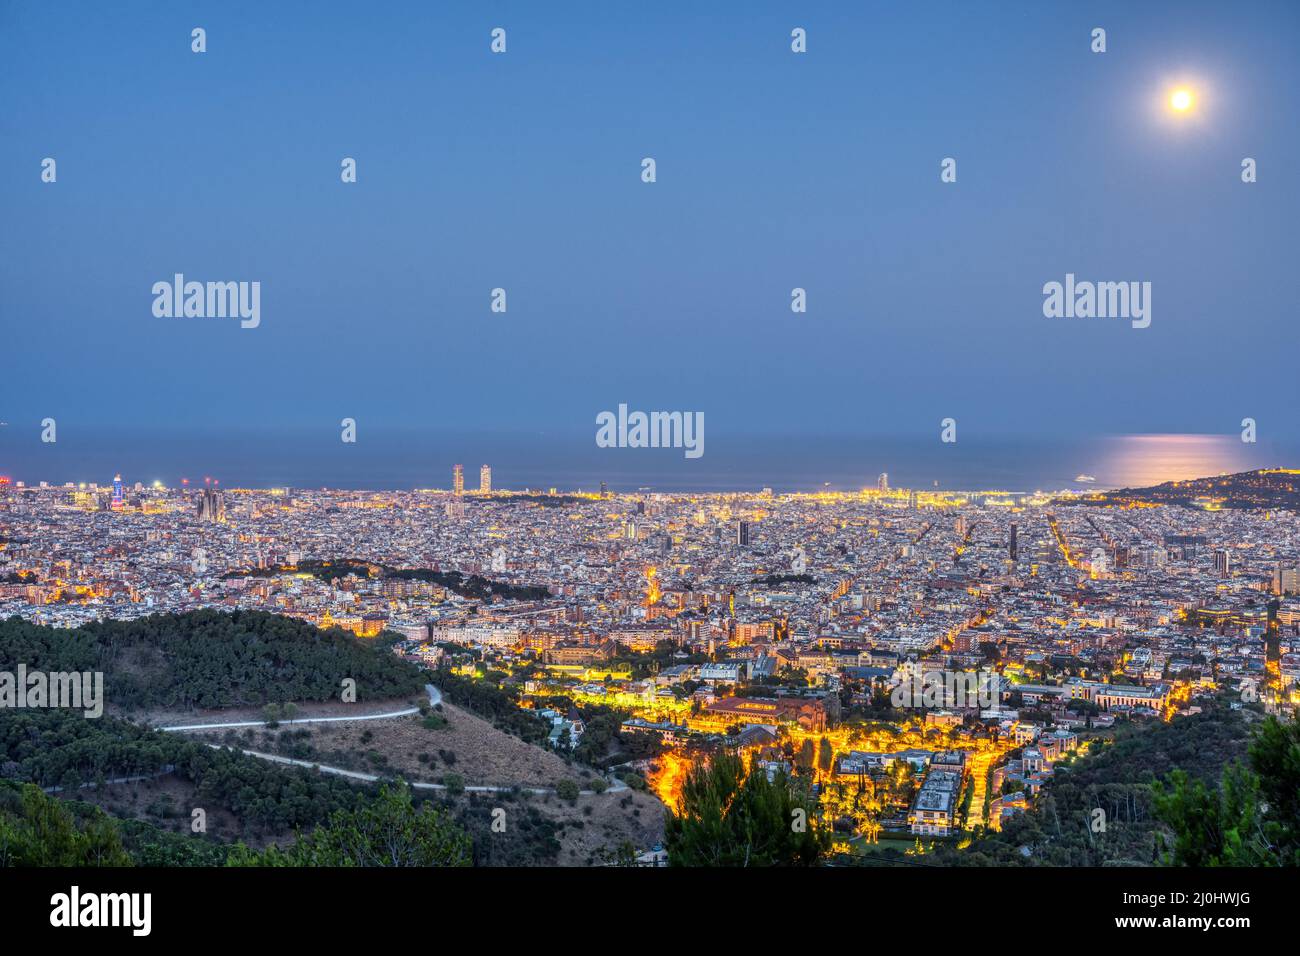 Barcelona at night with a full moon Stock Photo